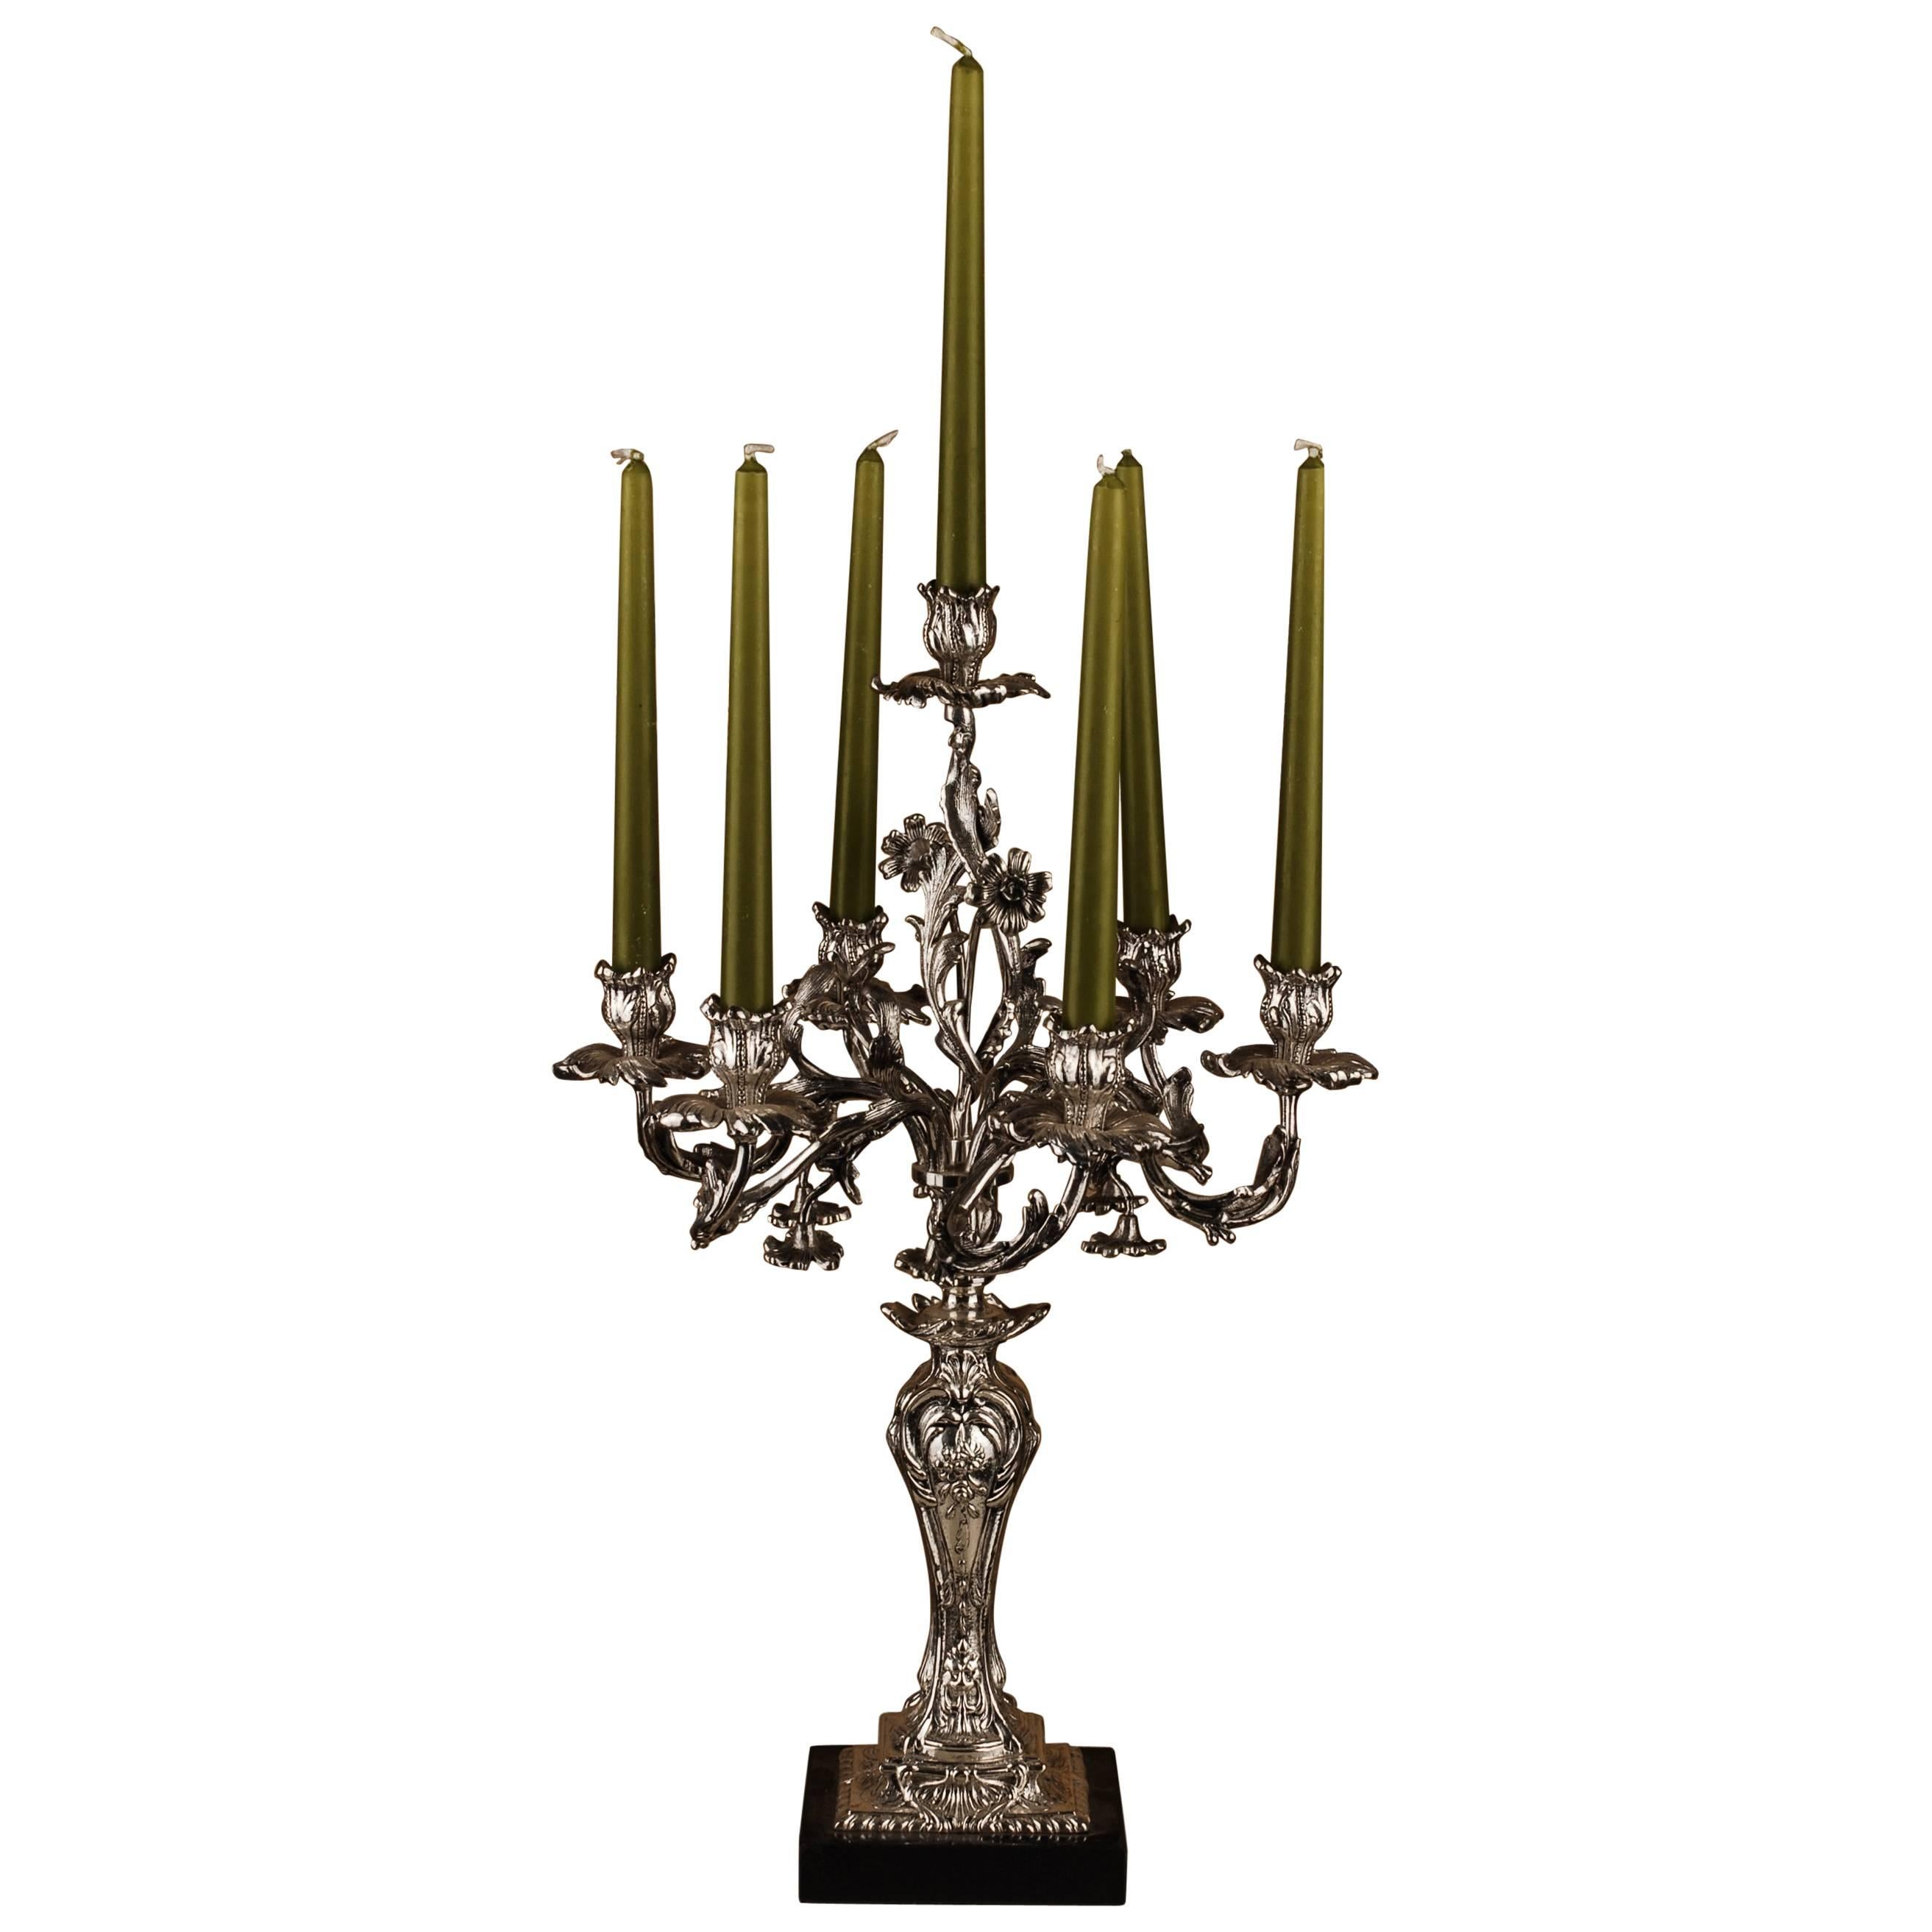 Exquisite Candelabra in Rococo Style For Sale